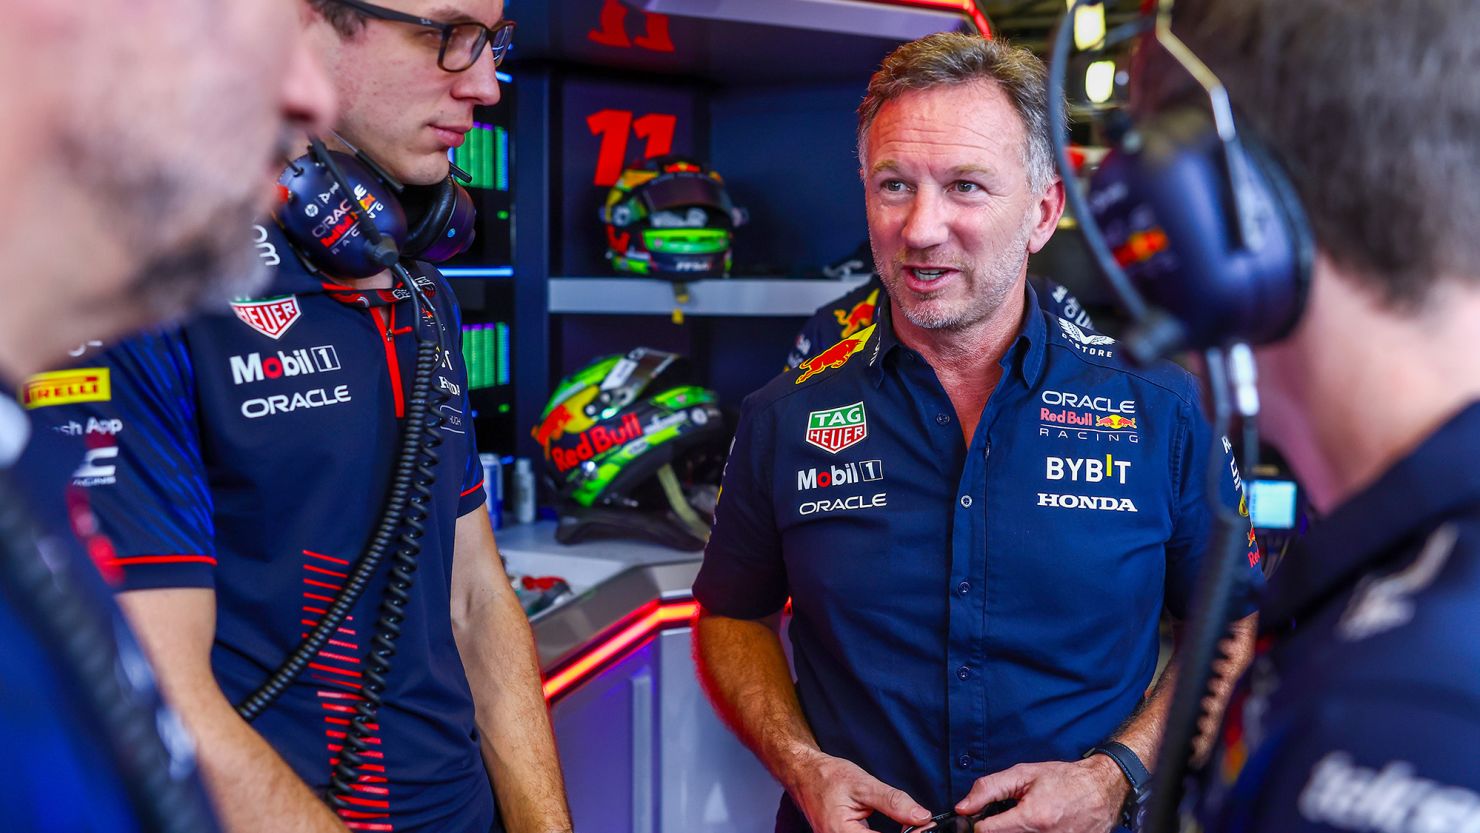 An independent investigation was launched by Red Bull in February after Christian Horner was accused of engaging in inappropriate behavior towards a member of the racing team.